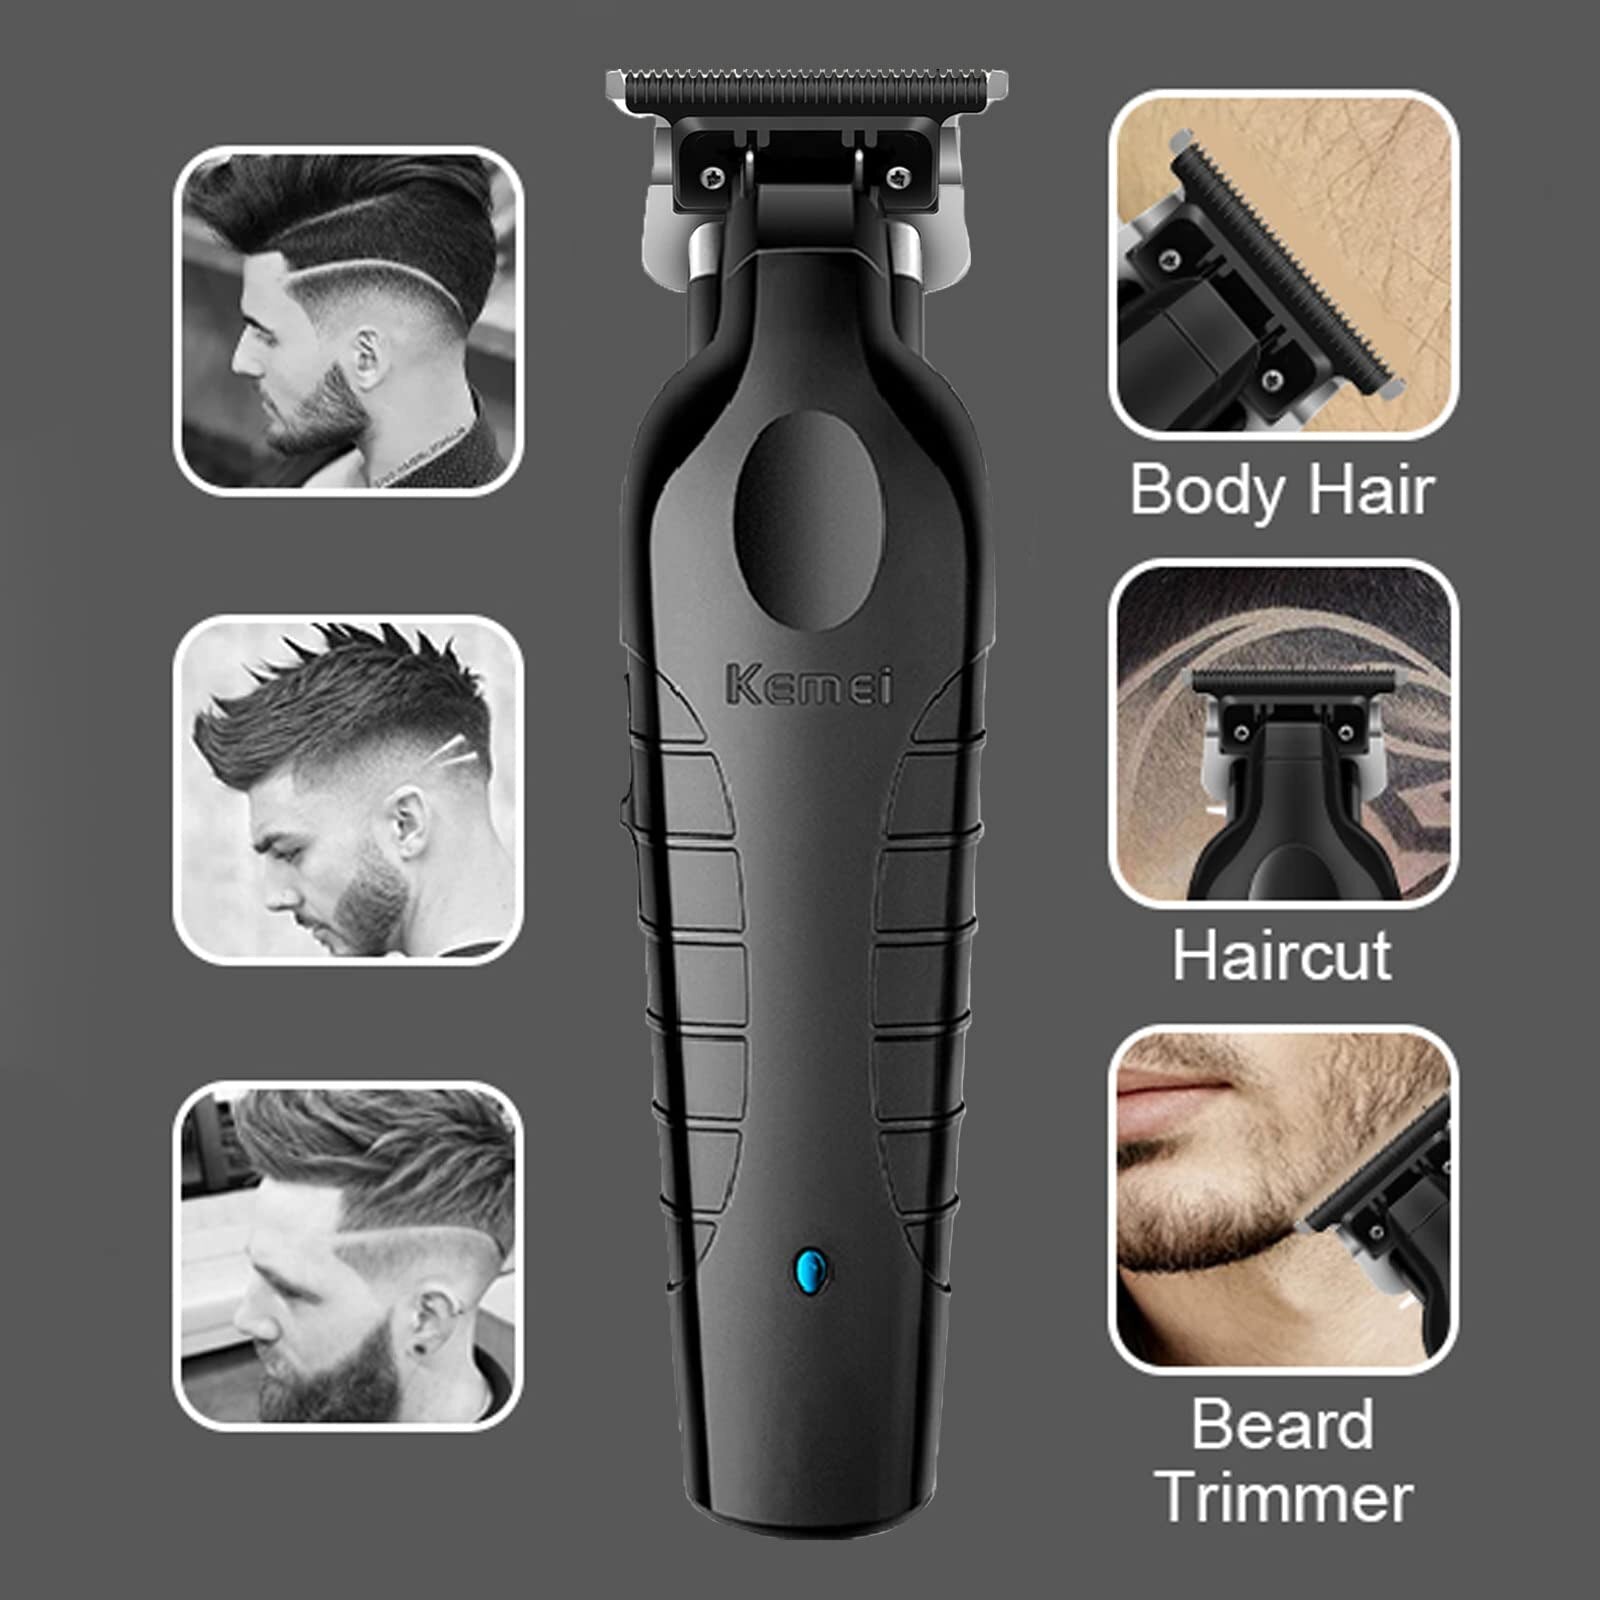 KEMEI Black Hair Clippers for Men Cordless Clippers for Hair Cutting Professional Barber Clippers USB Rechargeable Wireless Hair